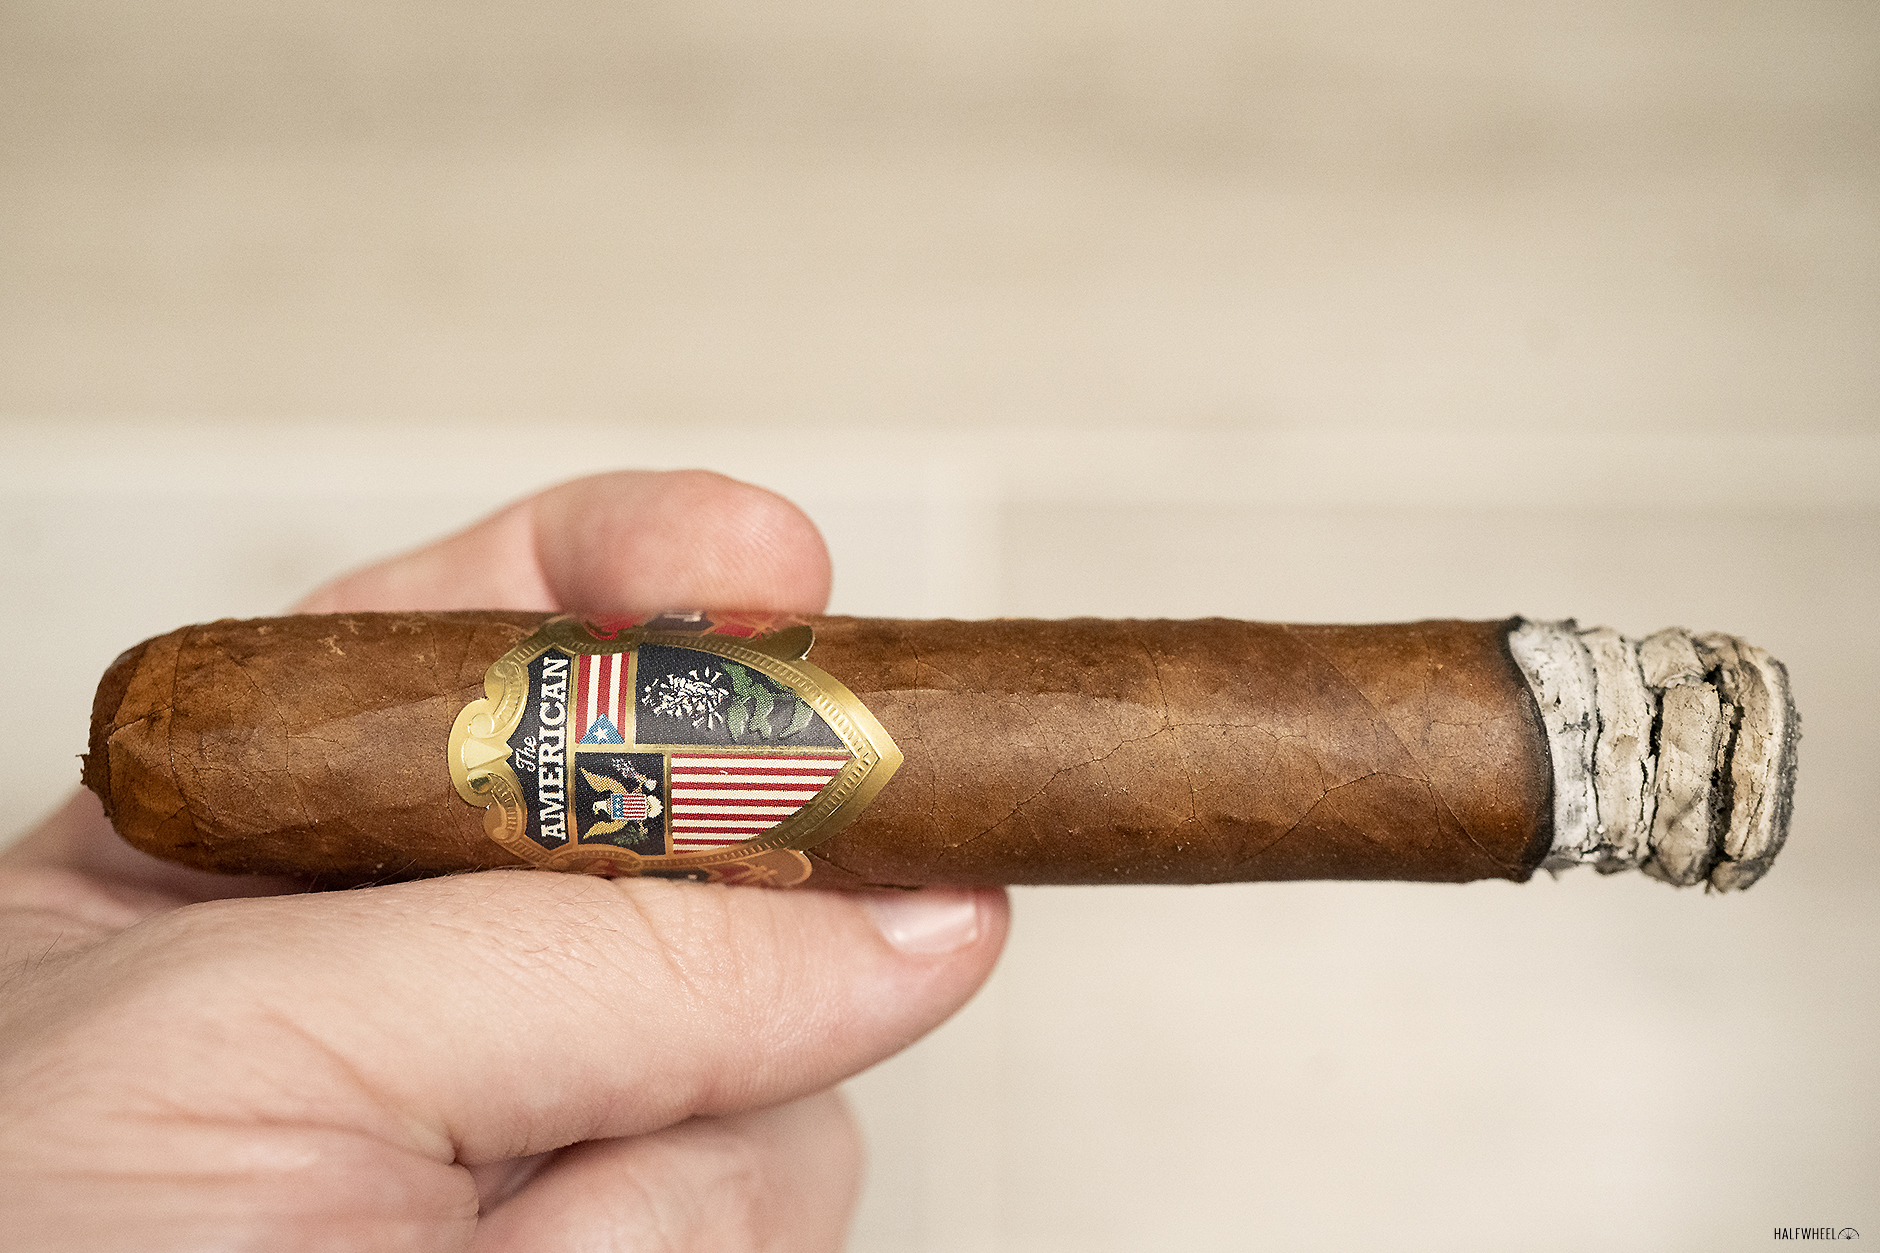 The American Cigar, Cigars Rolled in America